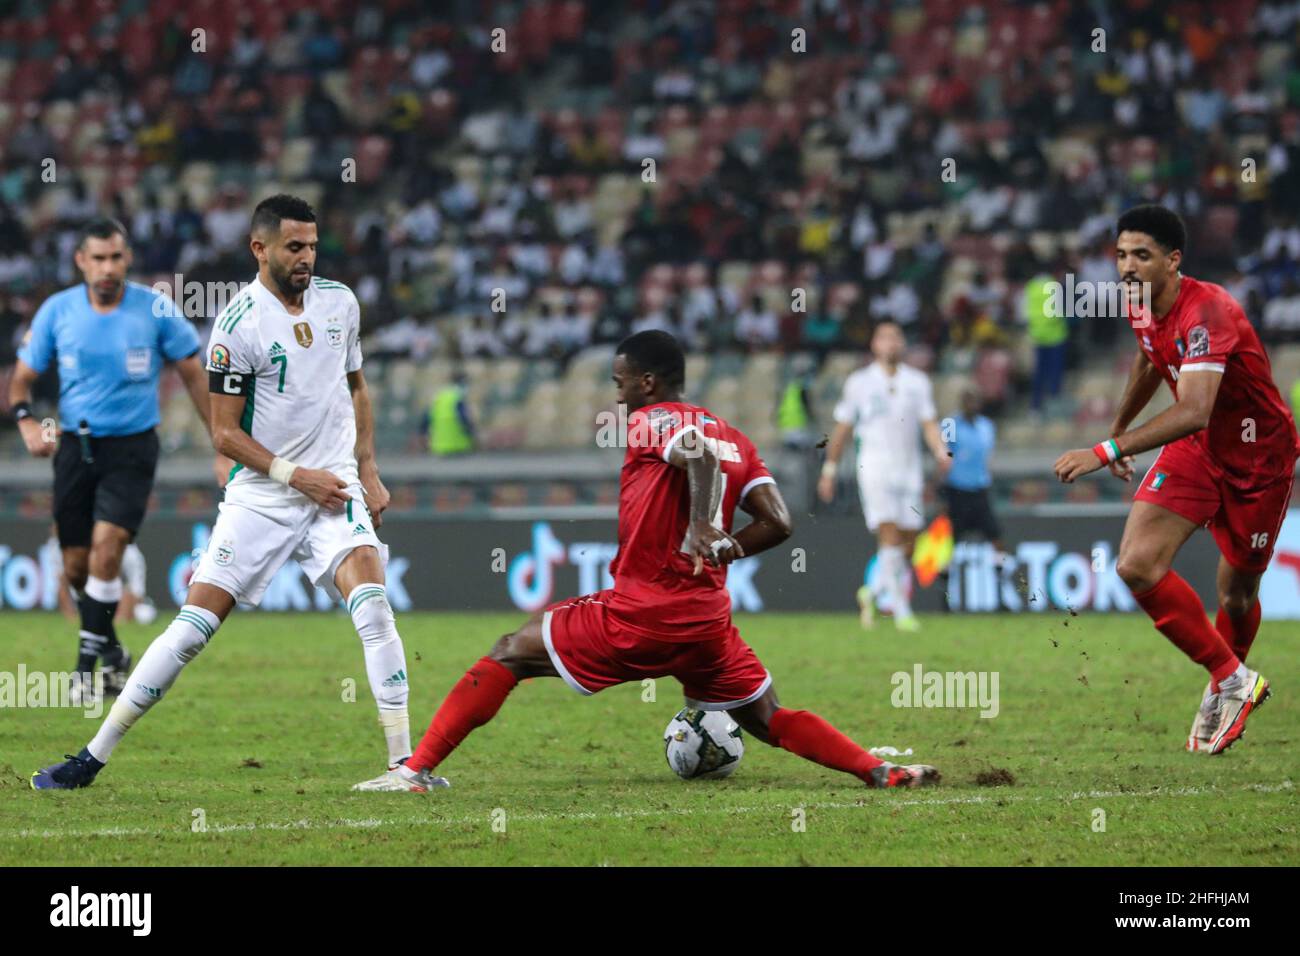 Douala, CAMEROON - JANUARY 16: Riyad Mahrez of Algeria on action during the Africa Cup of Nations group E match between Algeria and Equatorial Guinea at Stade de Japoma on January 16 2022 in Douala, Cameroon. (Photo by SF) Credit: Sebo47/Alamy Live News Stock Photo